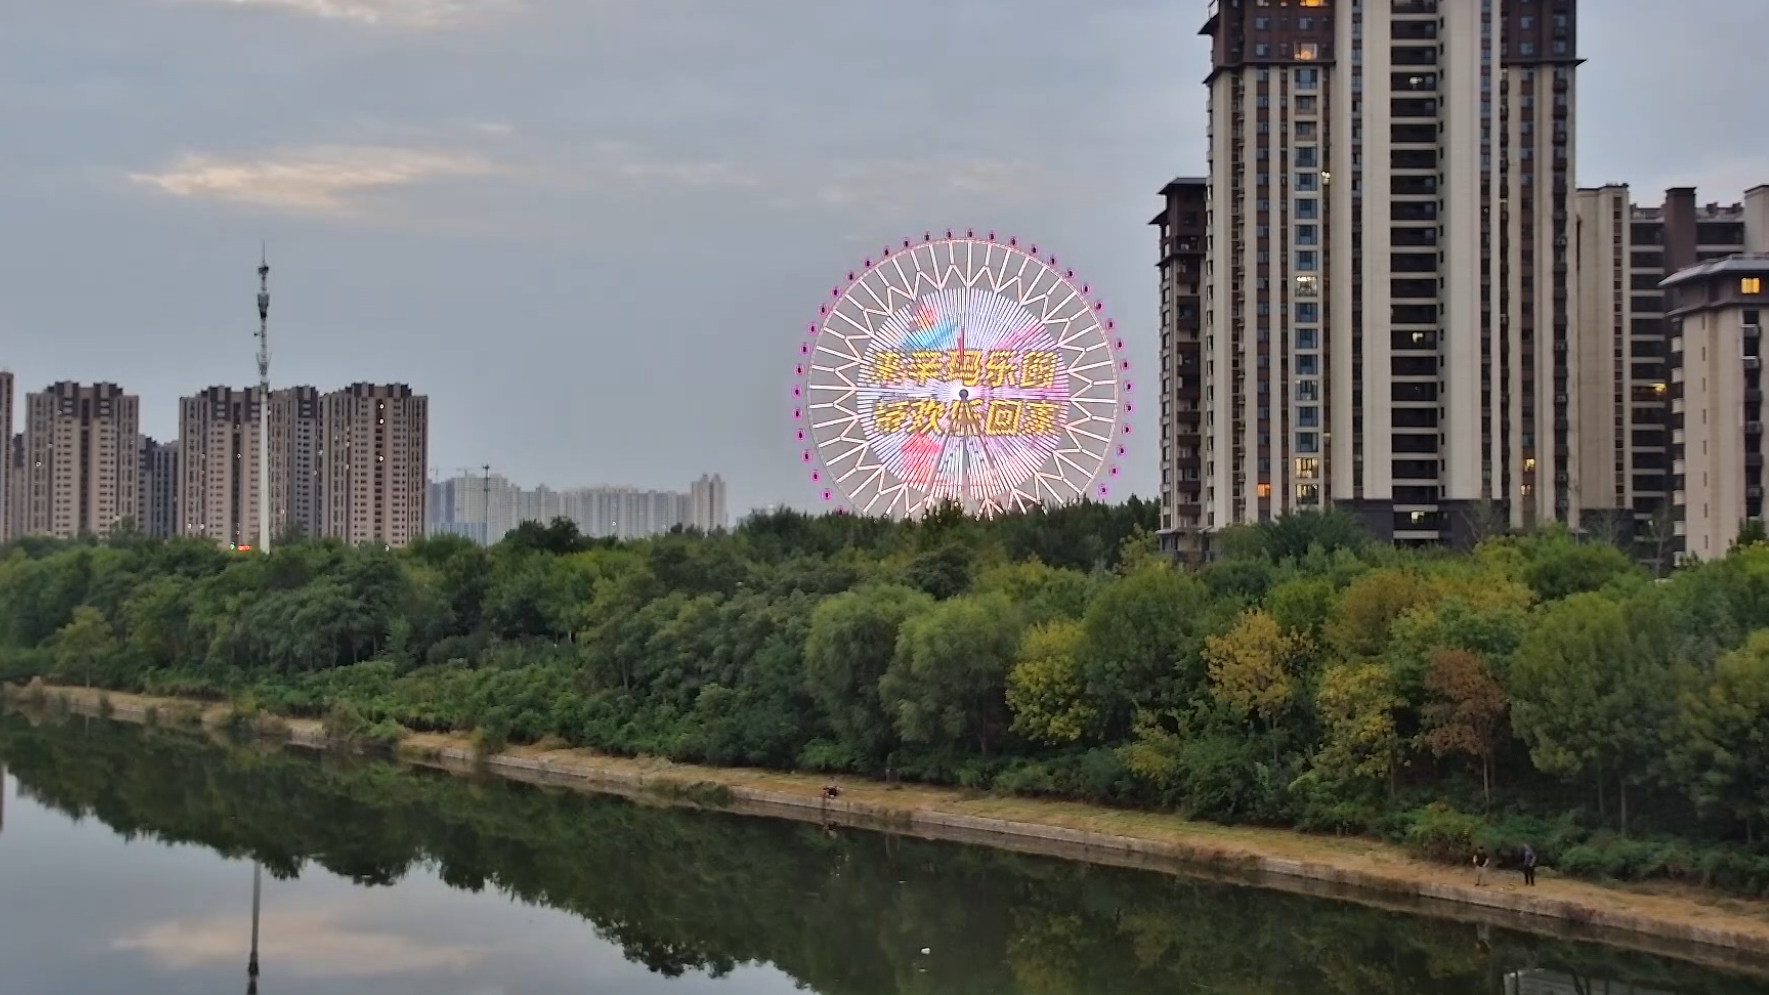 Live: Take a ride on the Ferris wheel in N China